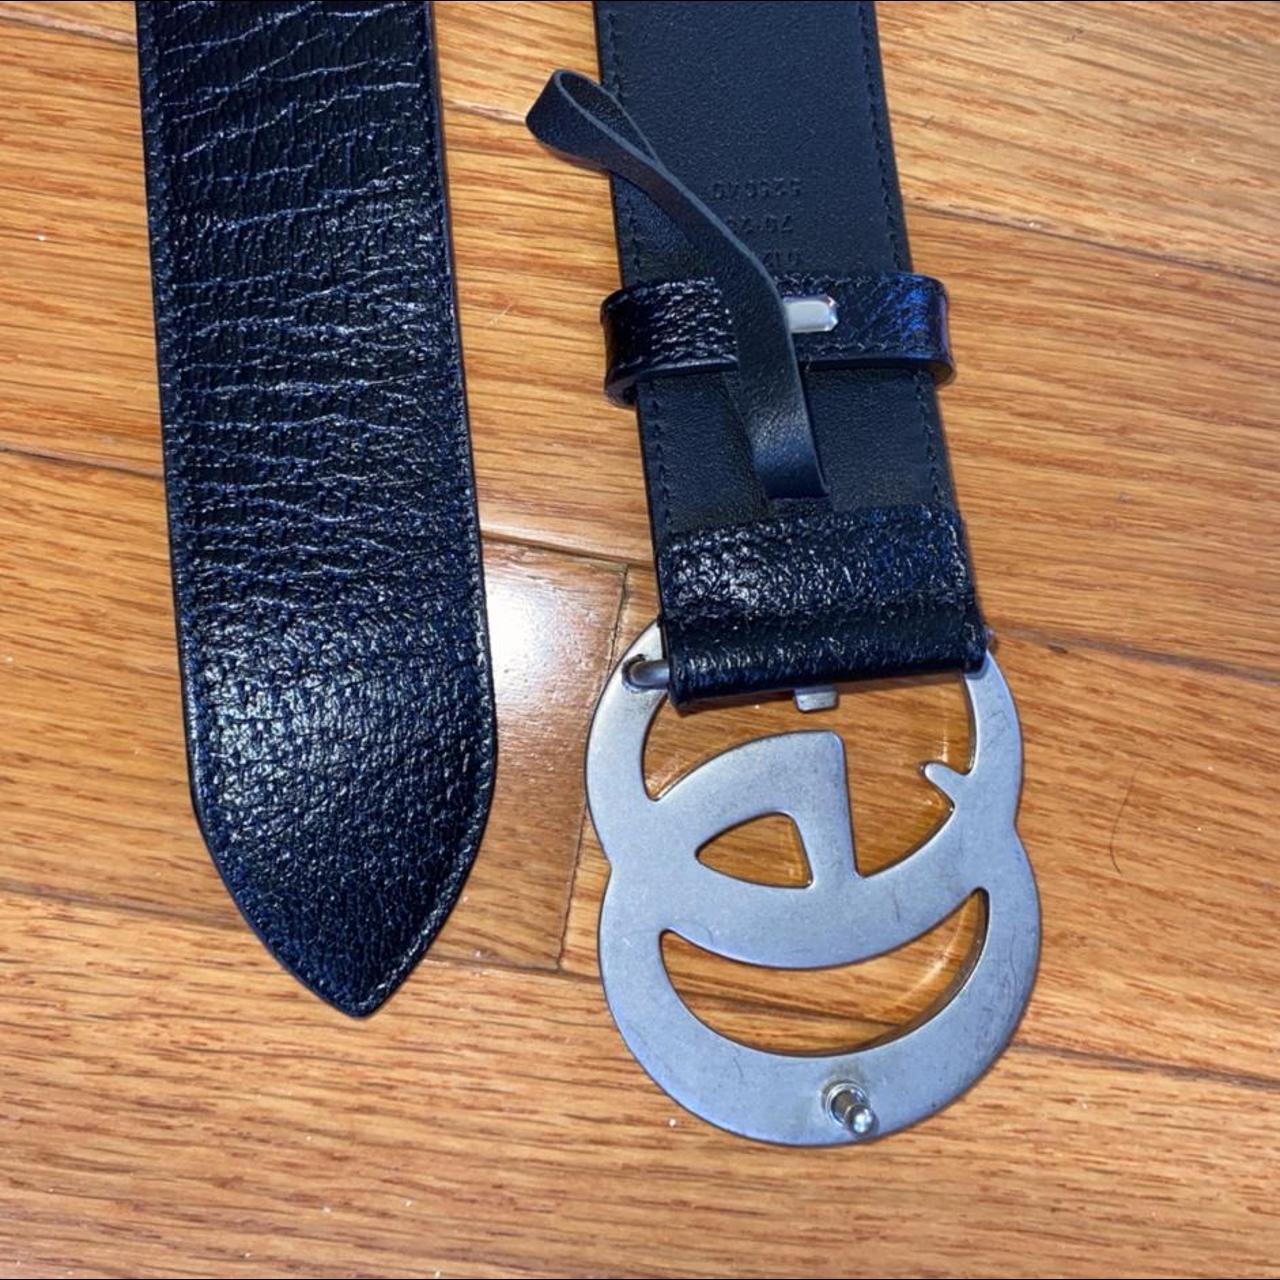 Authentic silver gucci belt Black, thick, leather - Depop